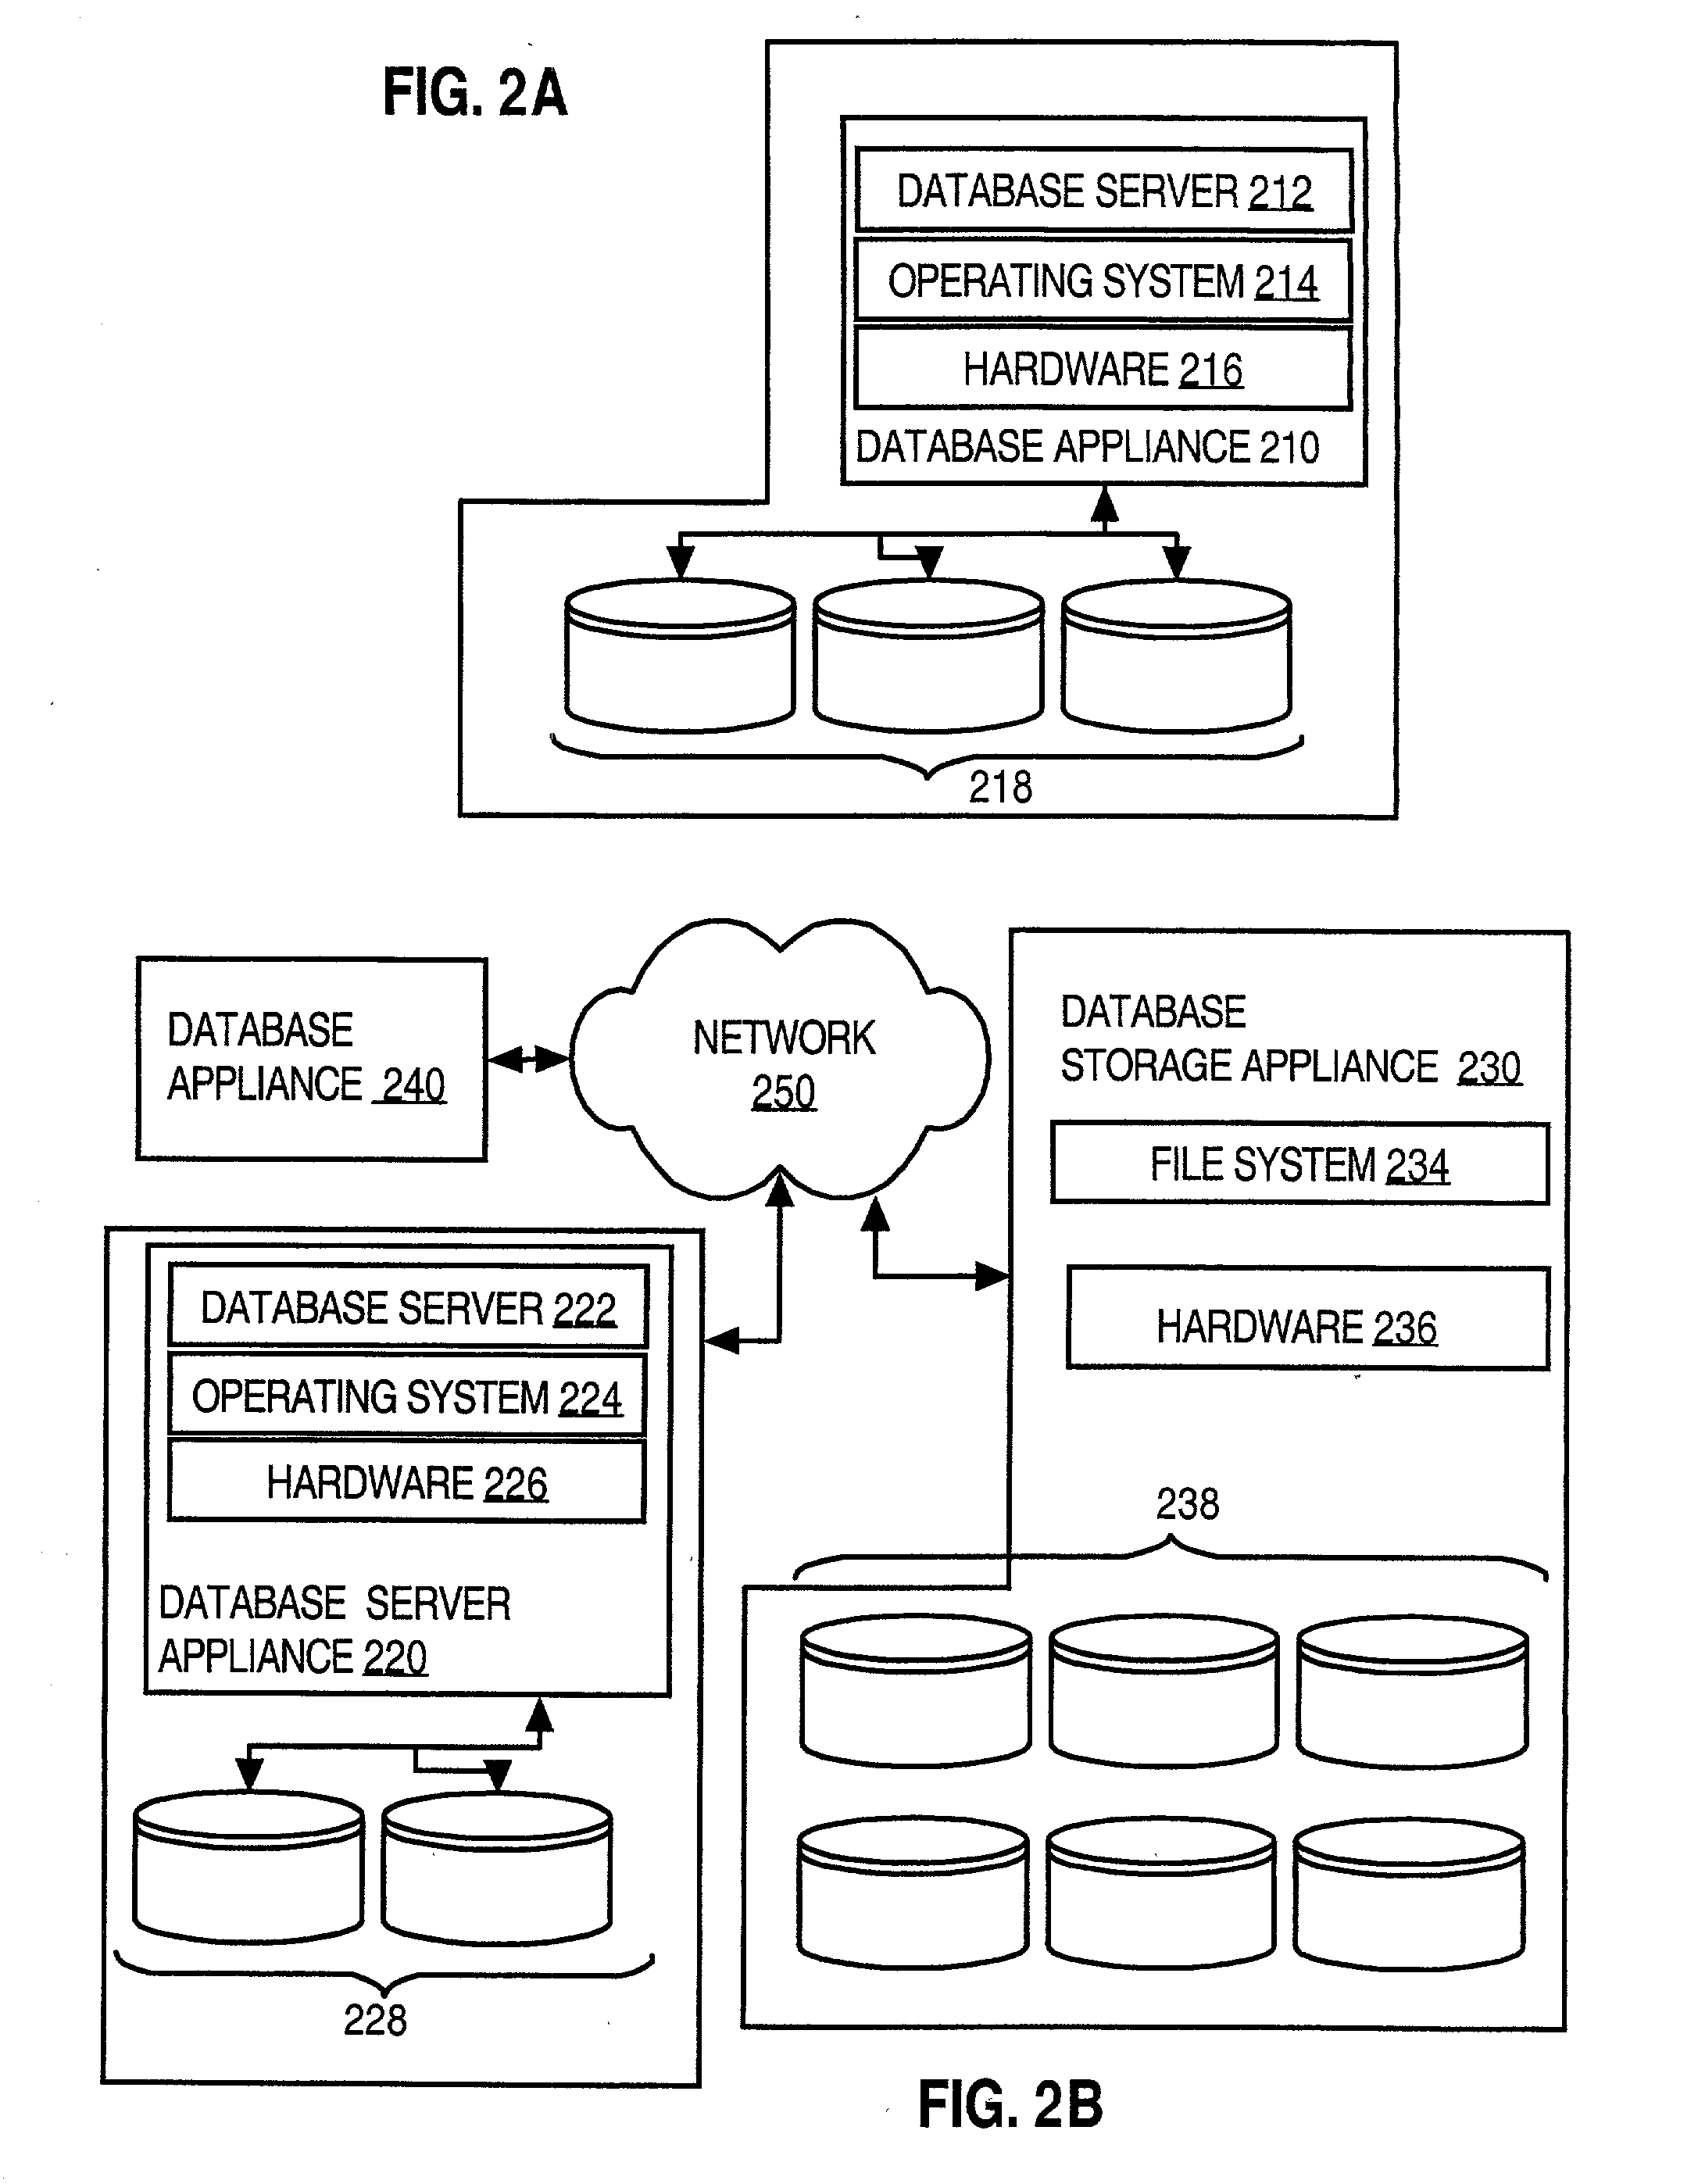 Techniques for automatically provisioning a database over a wide area network